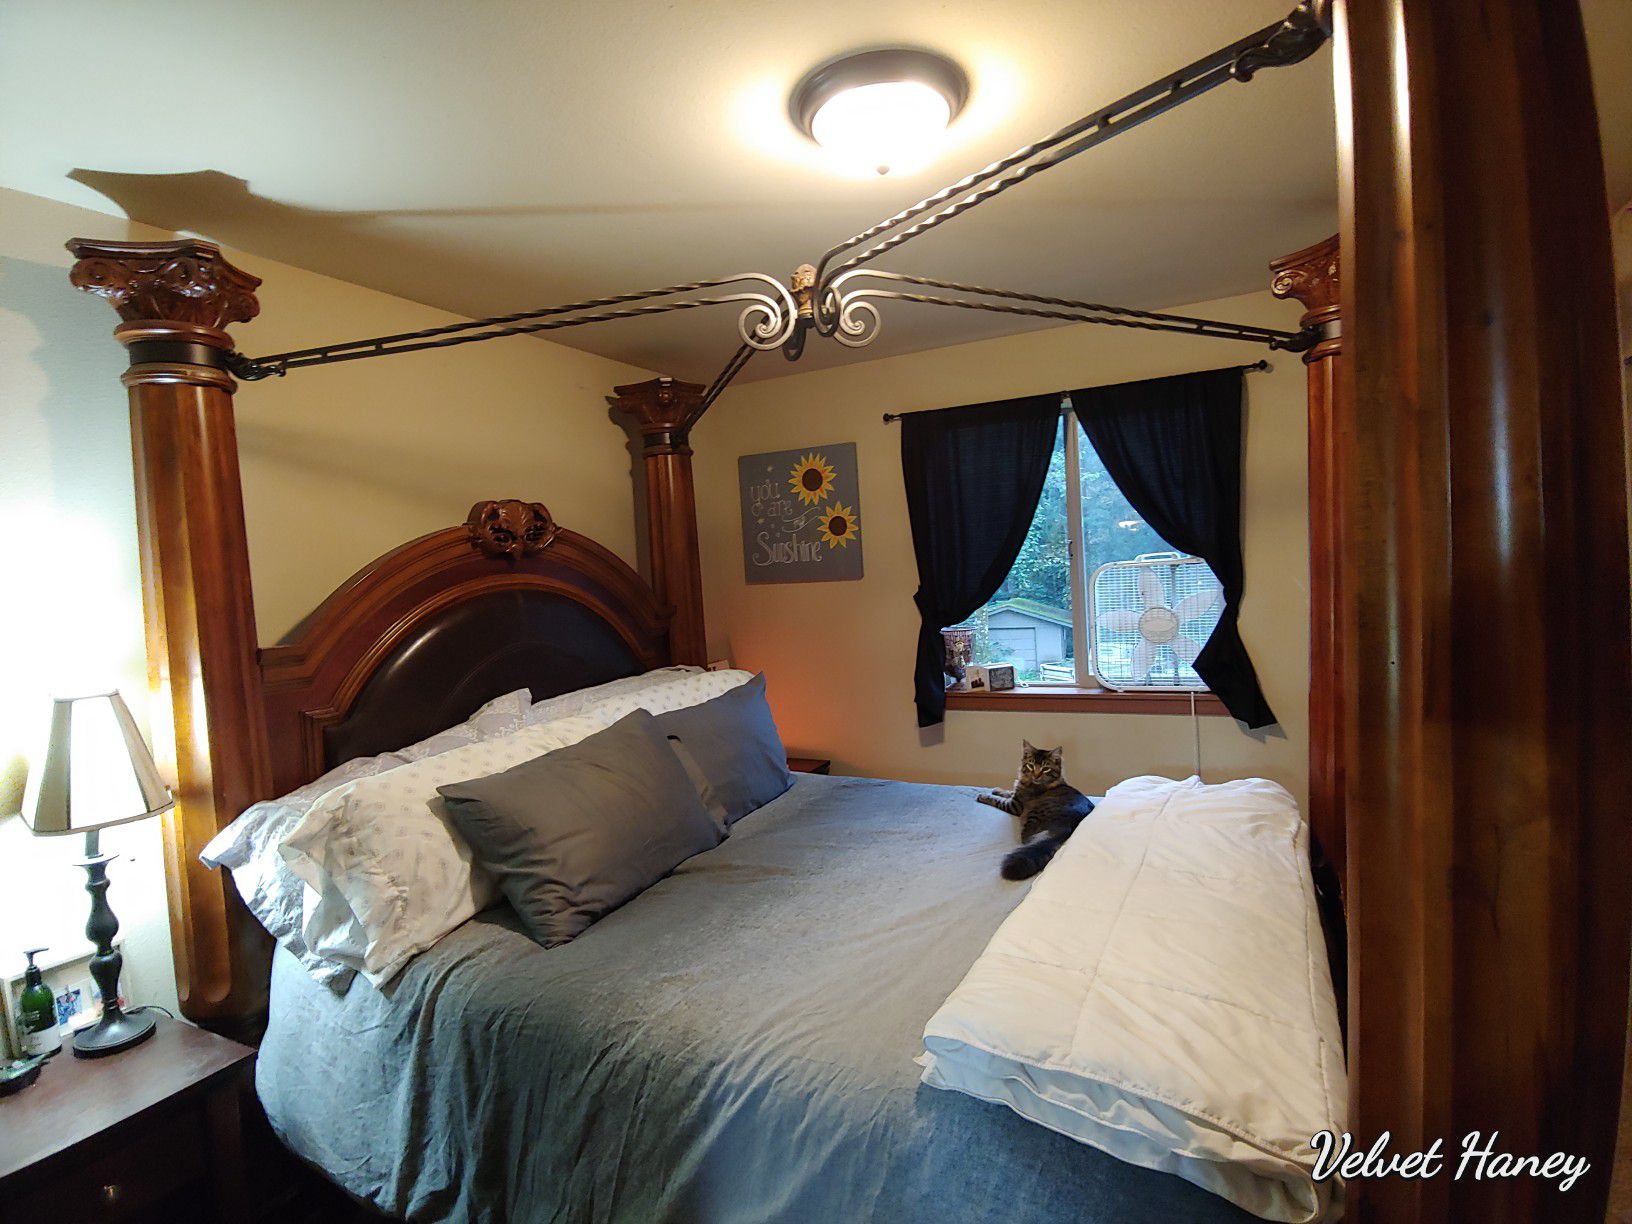 Queen headboard and bed frame